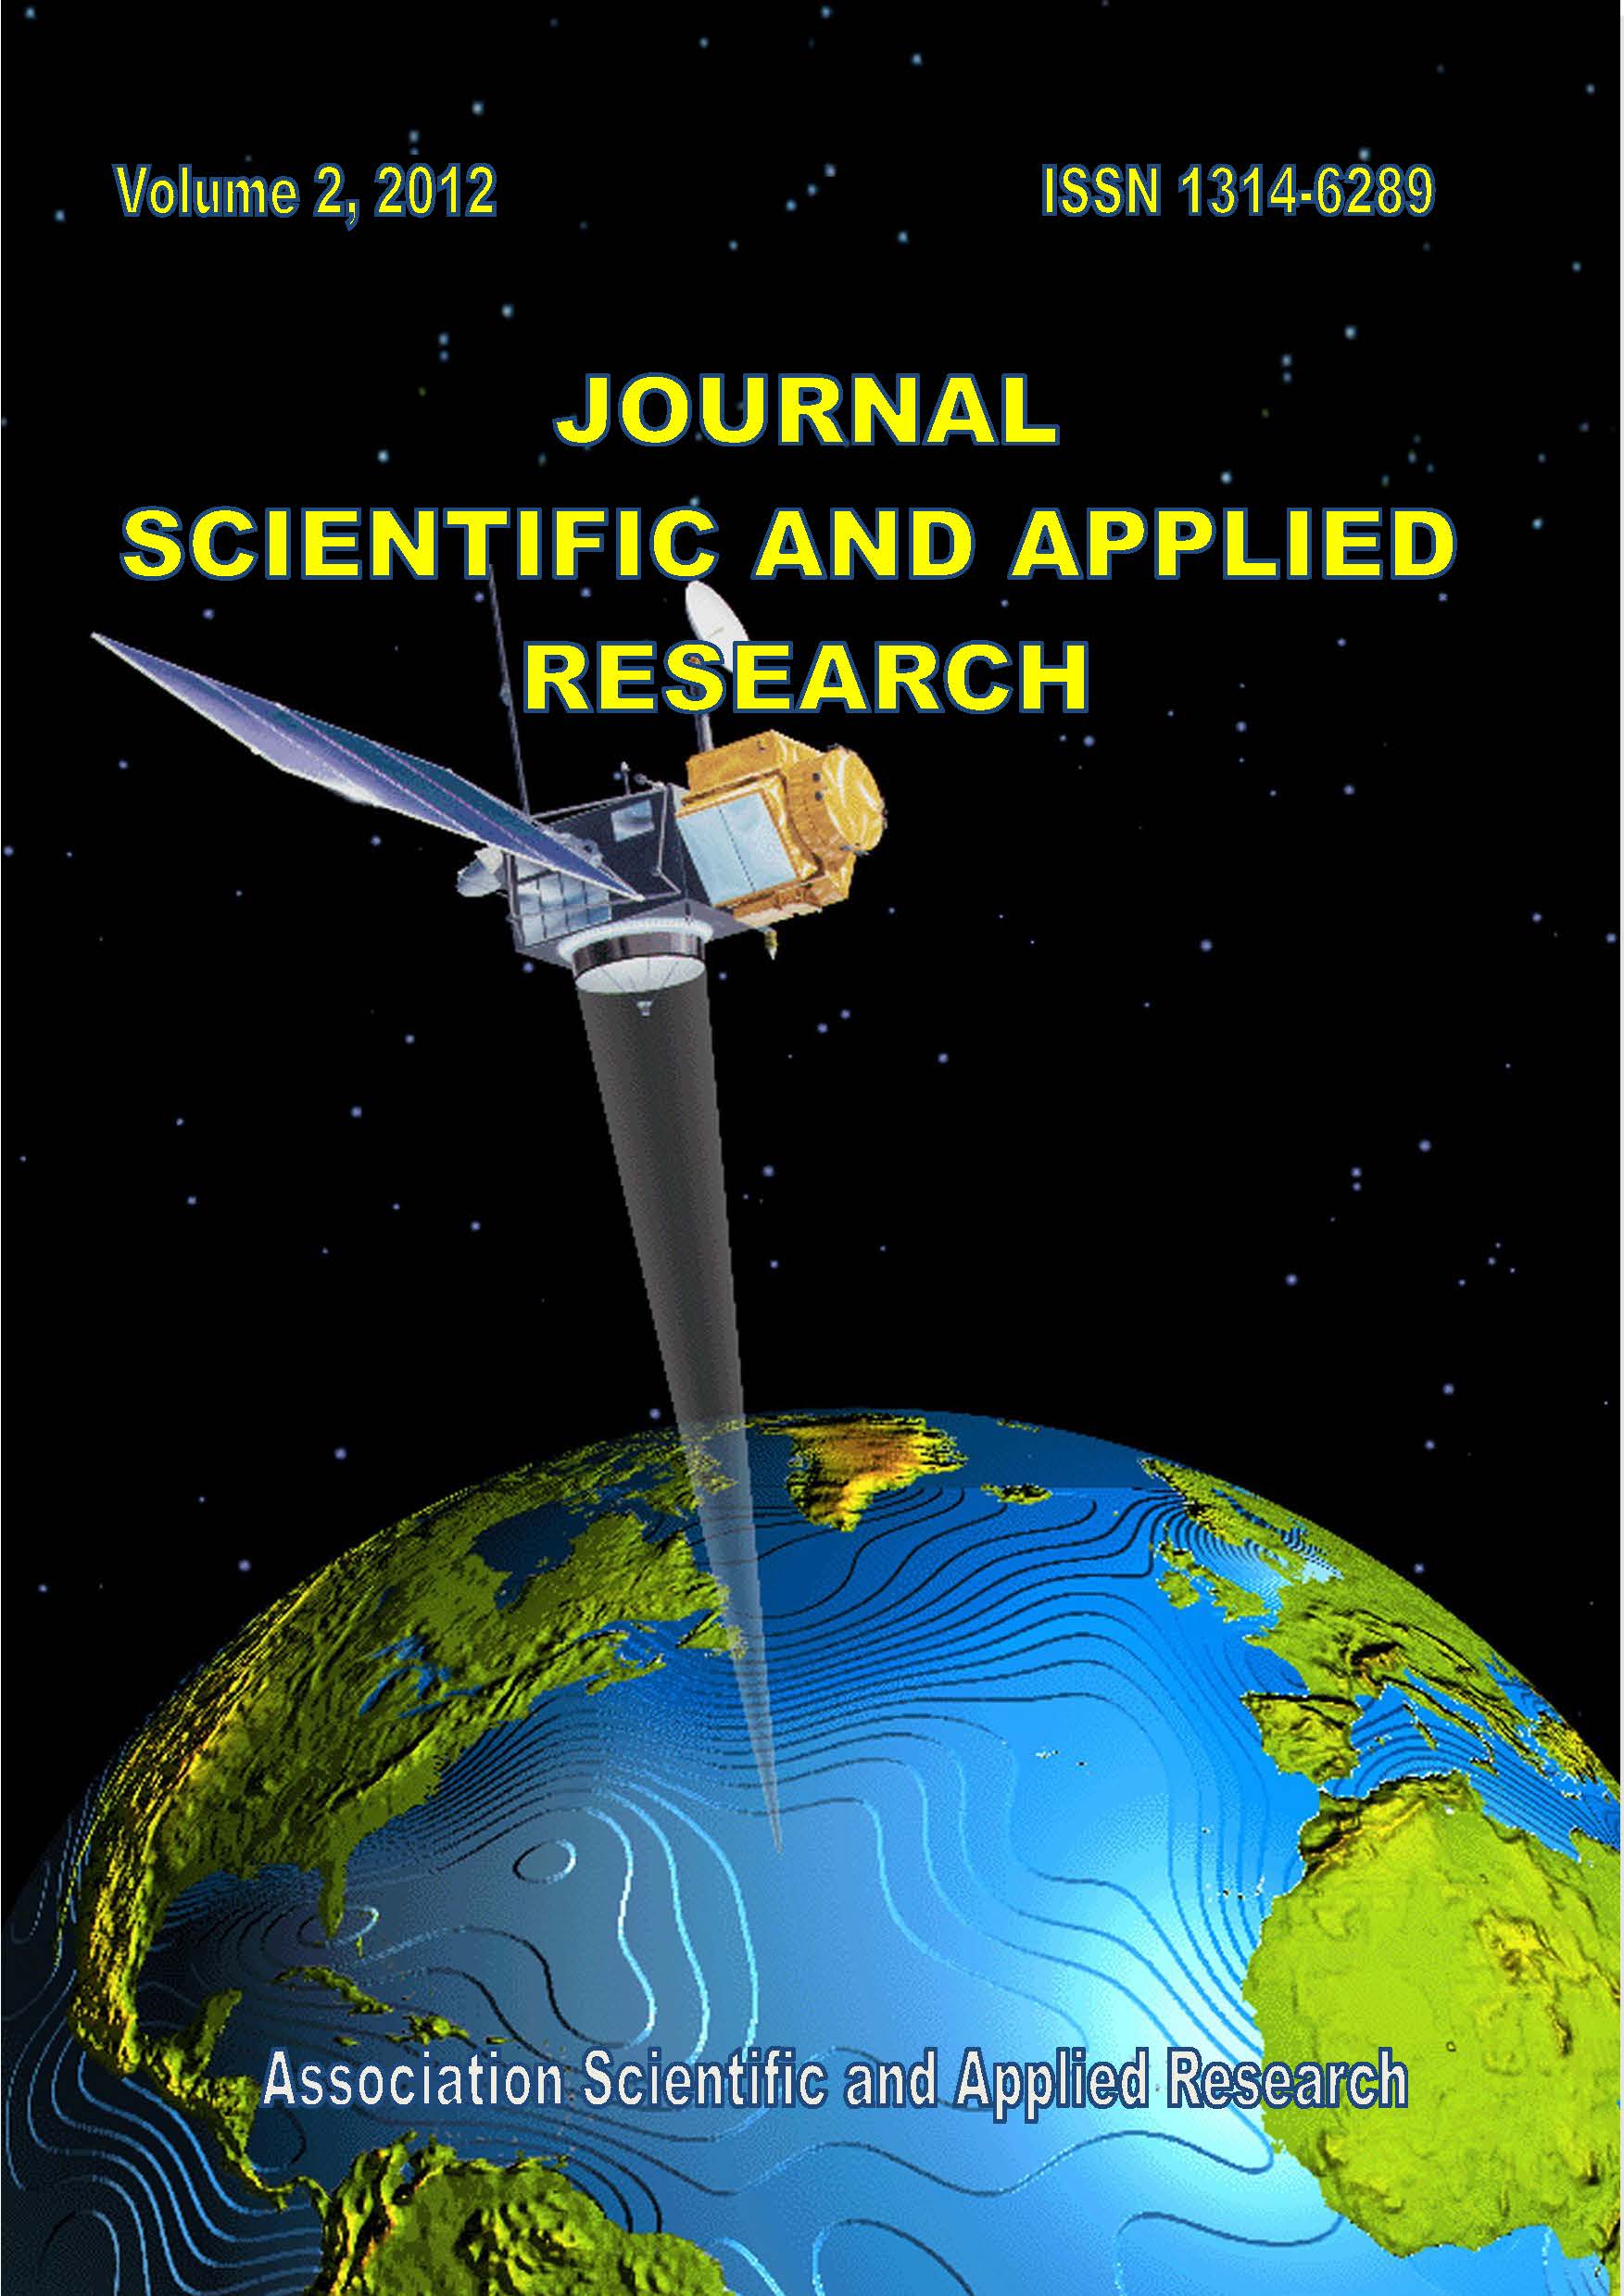 					View Vol. 2 No. 1 (2012): Journal Scientific and Applied Research
				